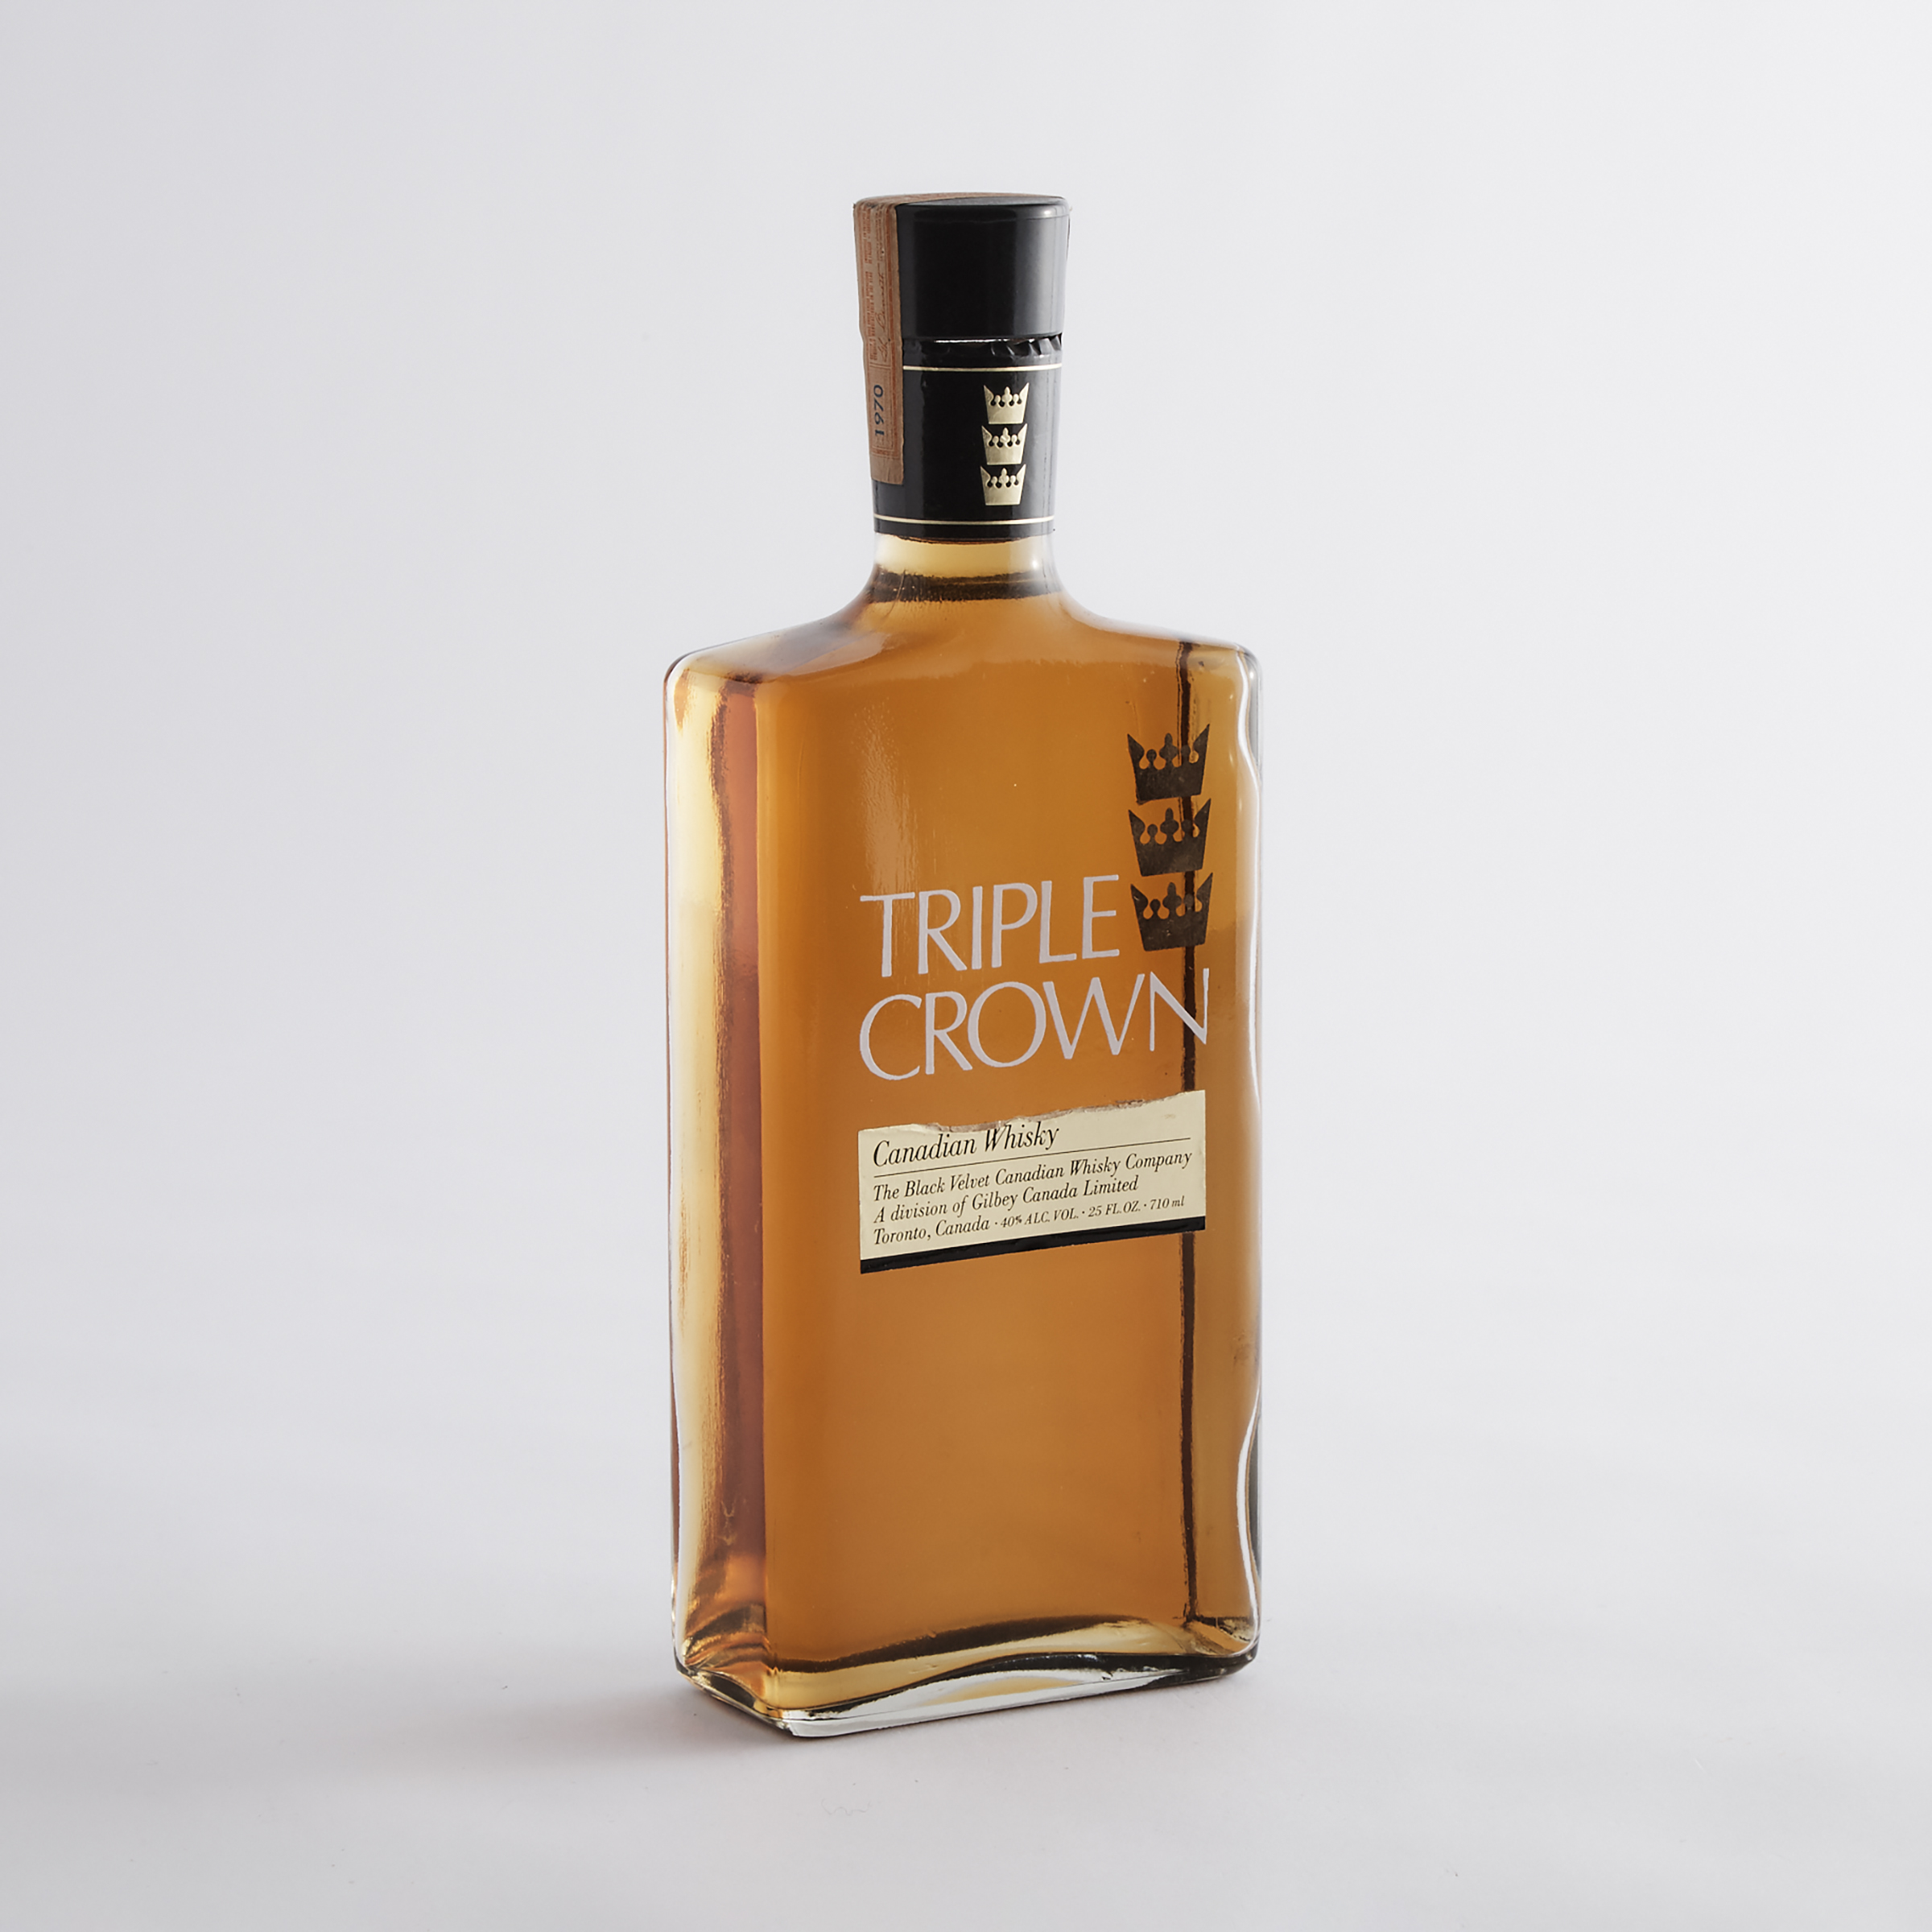 TRIPLE CROWN CANADIAN WHISKY (ONE 710 ML)